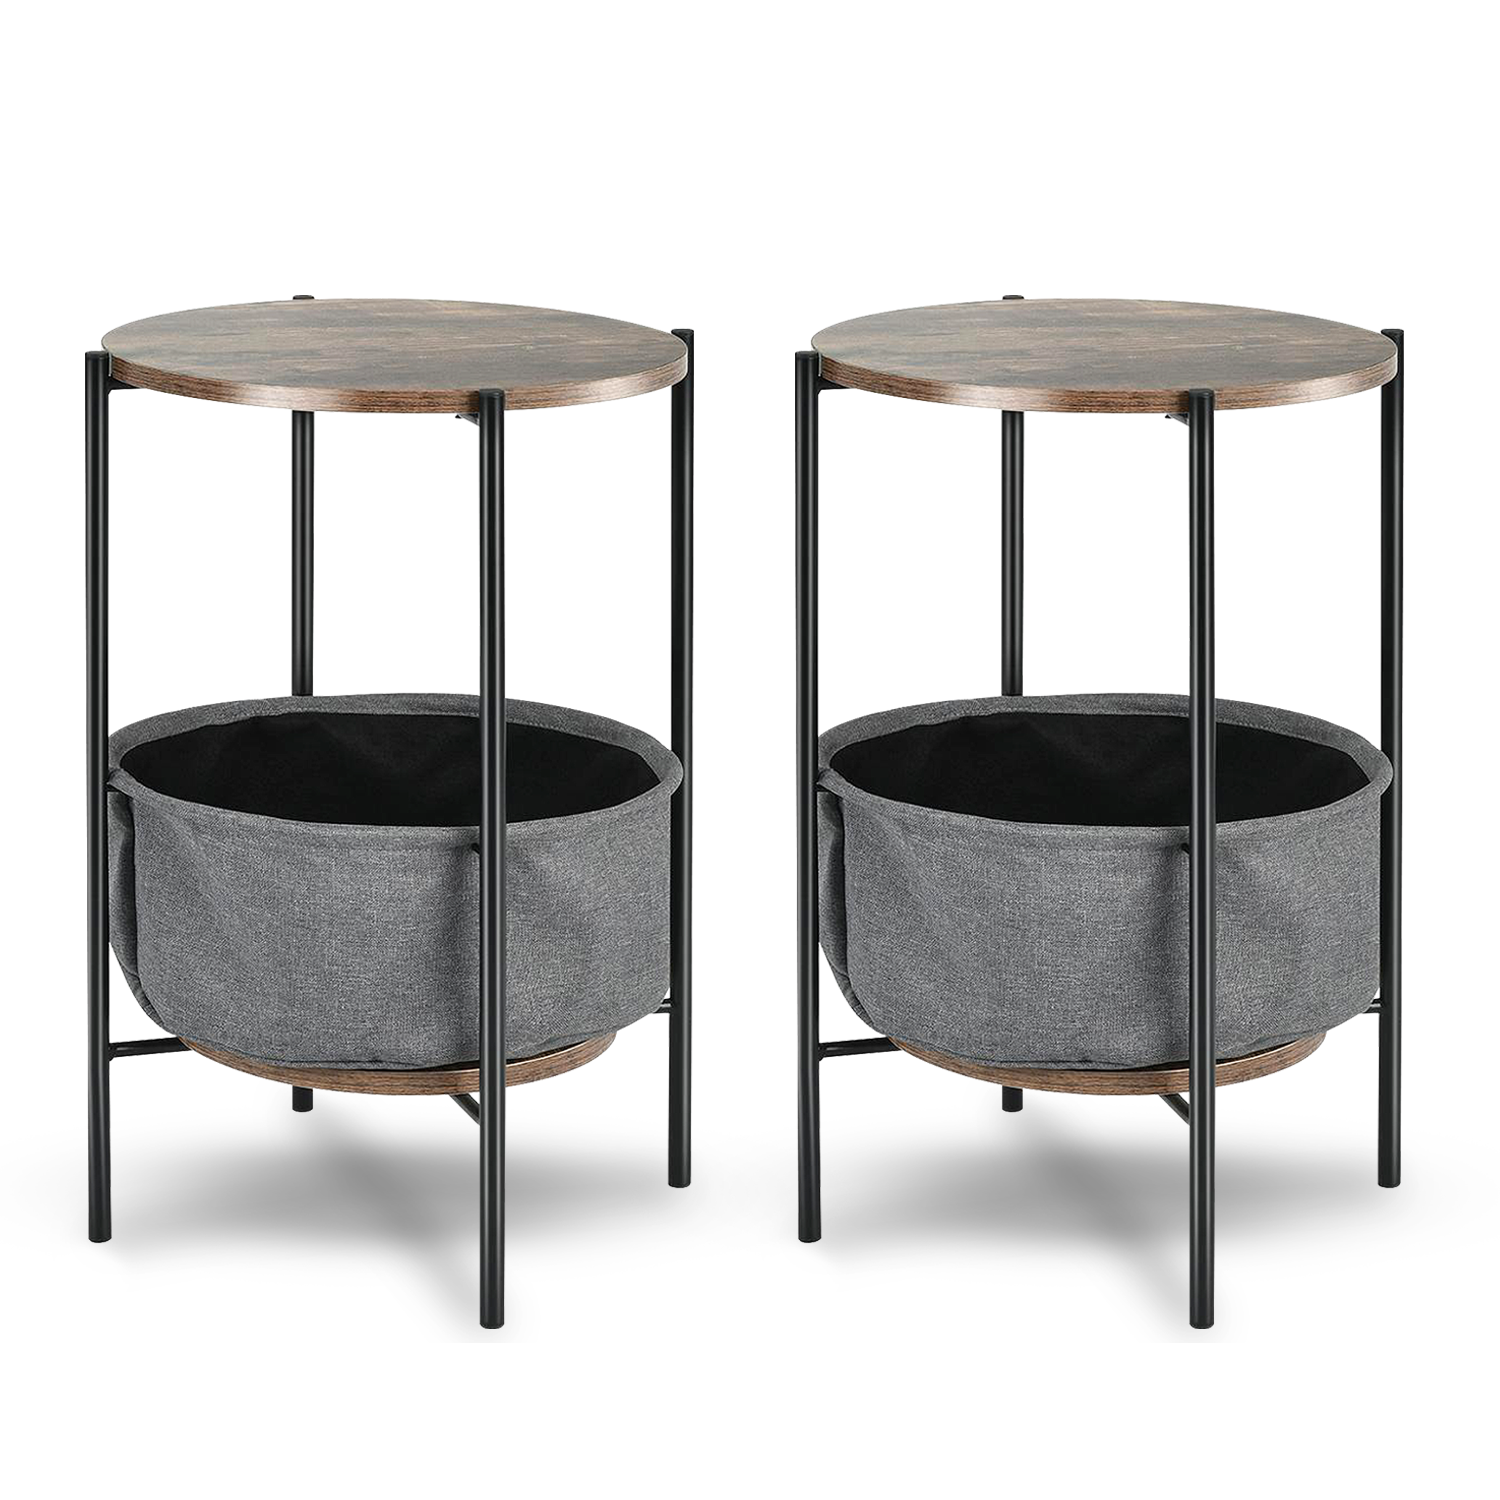 Set of 2 Industrial Round End Side Table